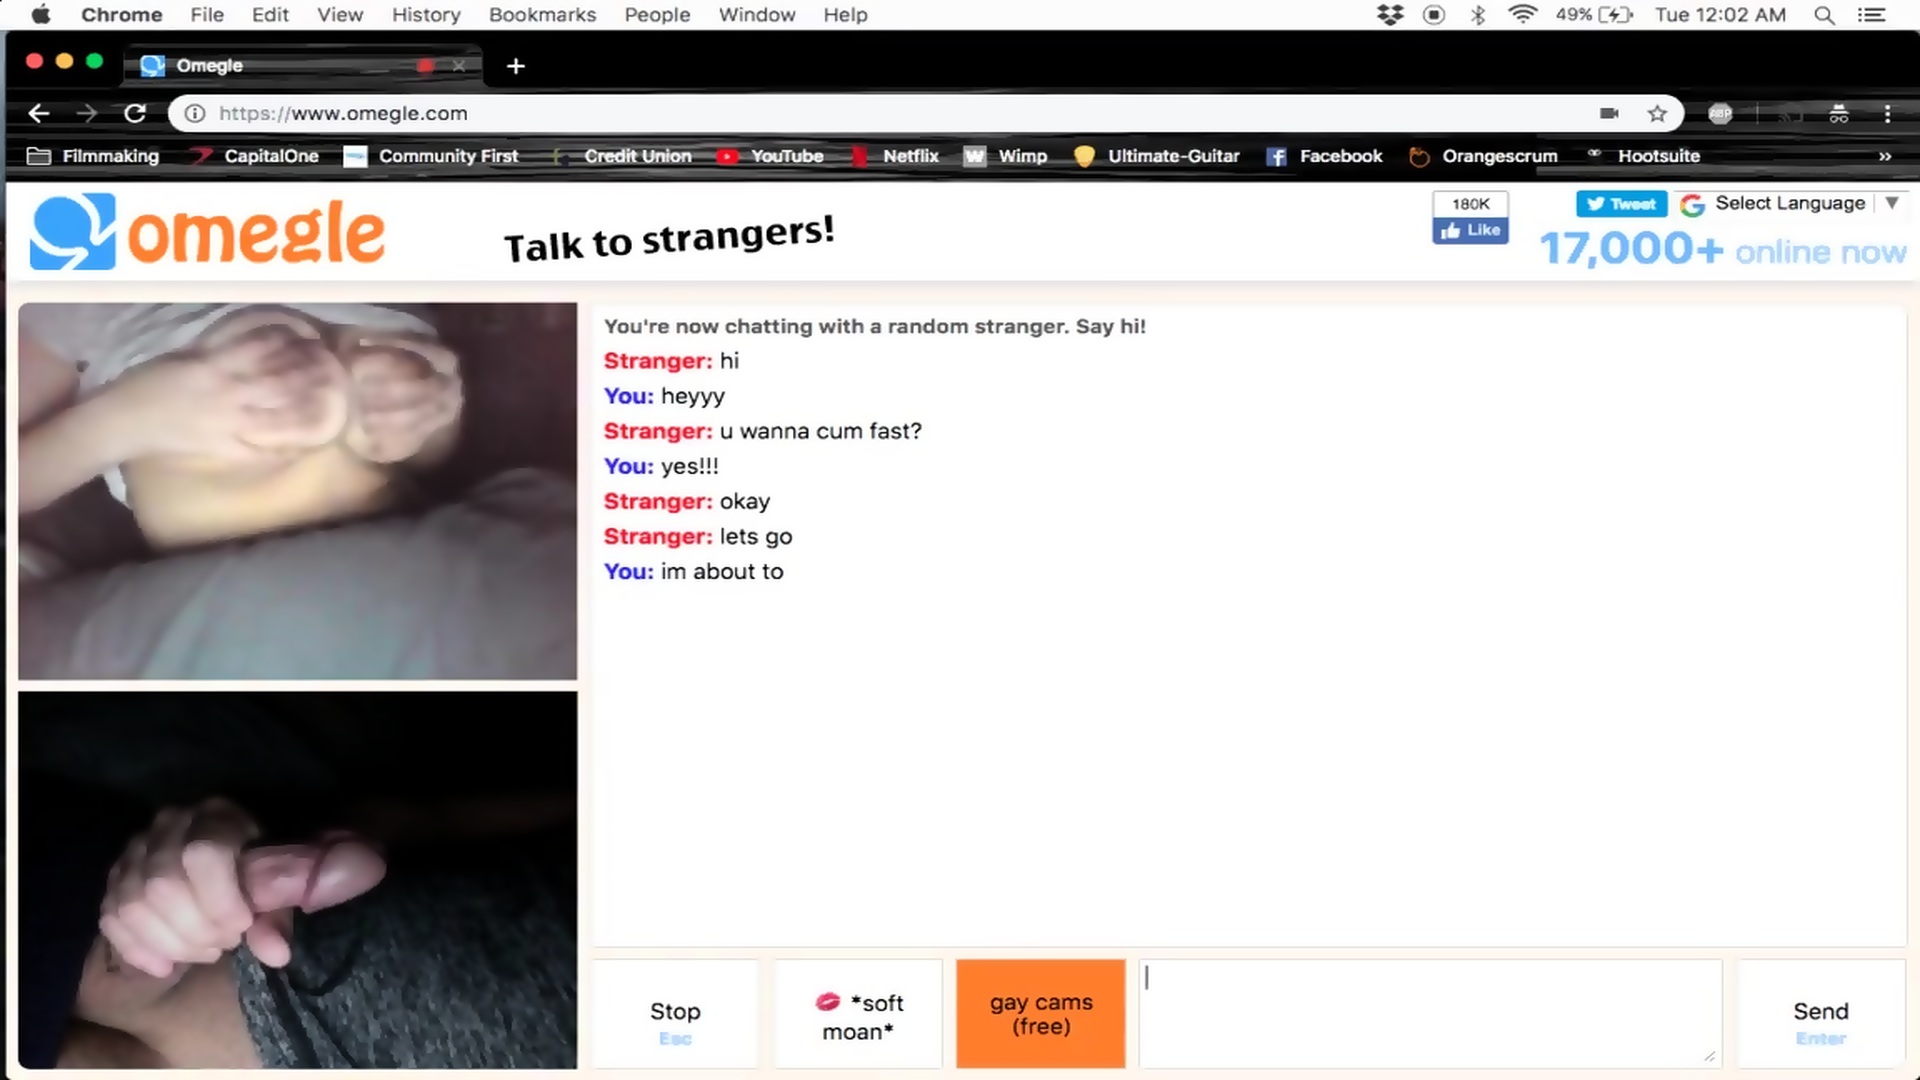 People showing their dicks on omegle